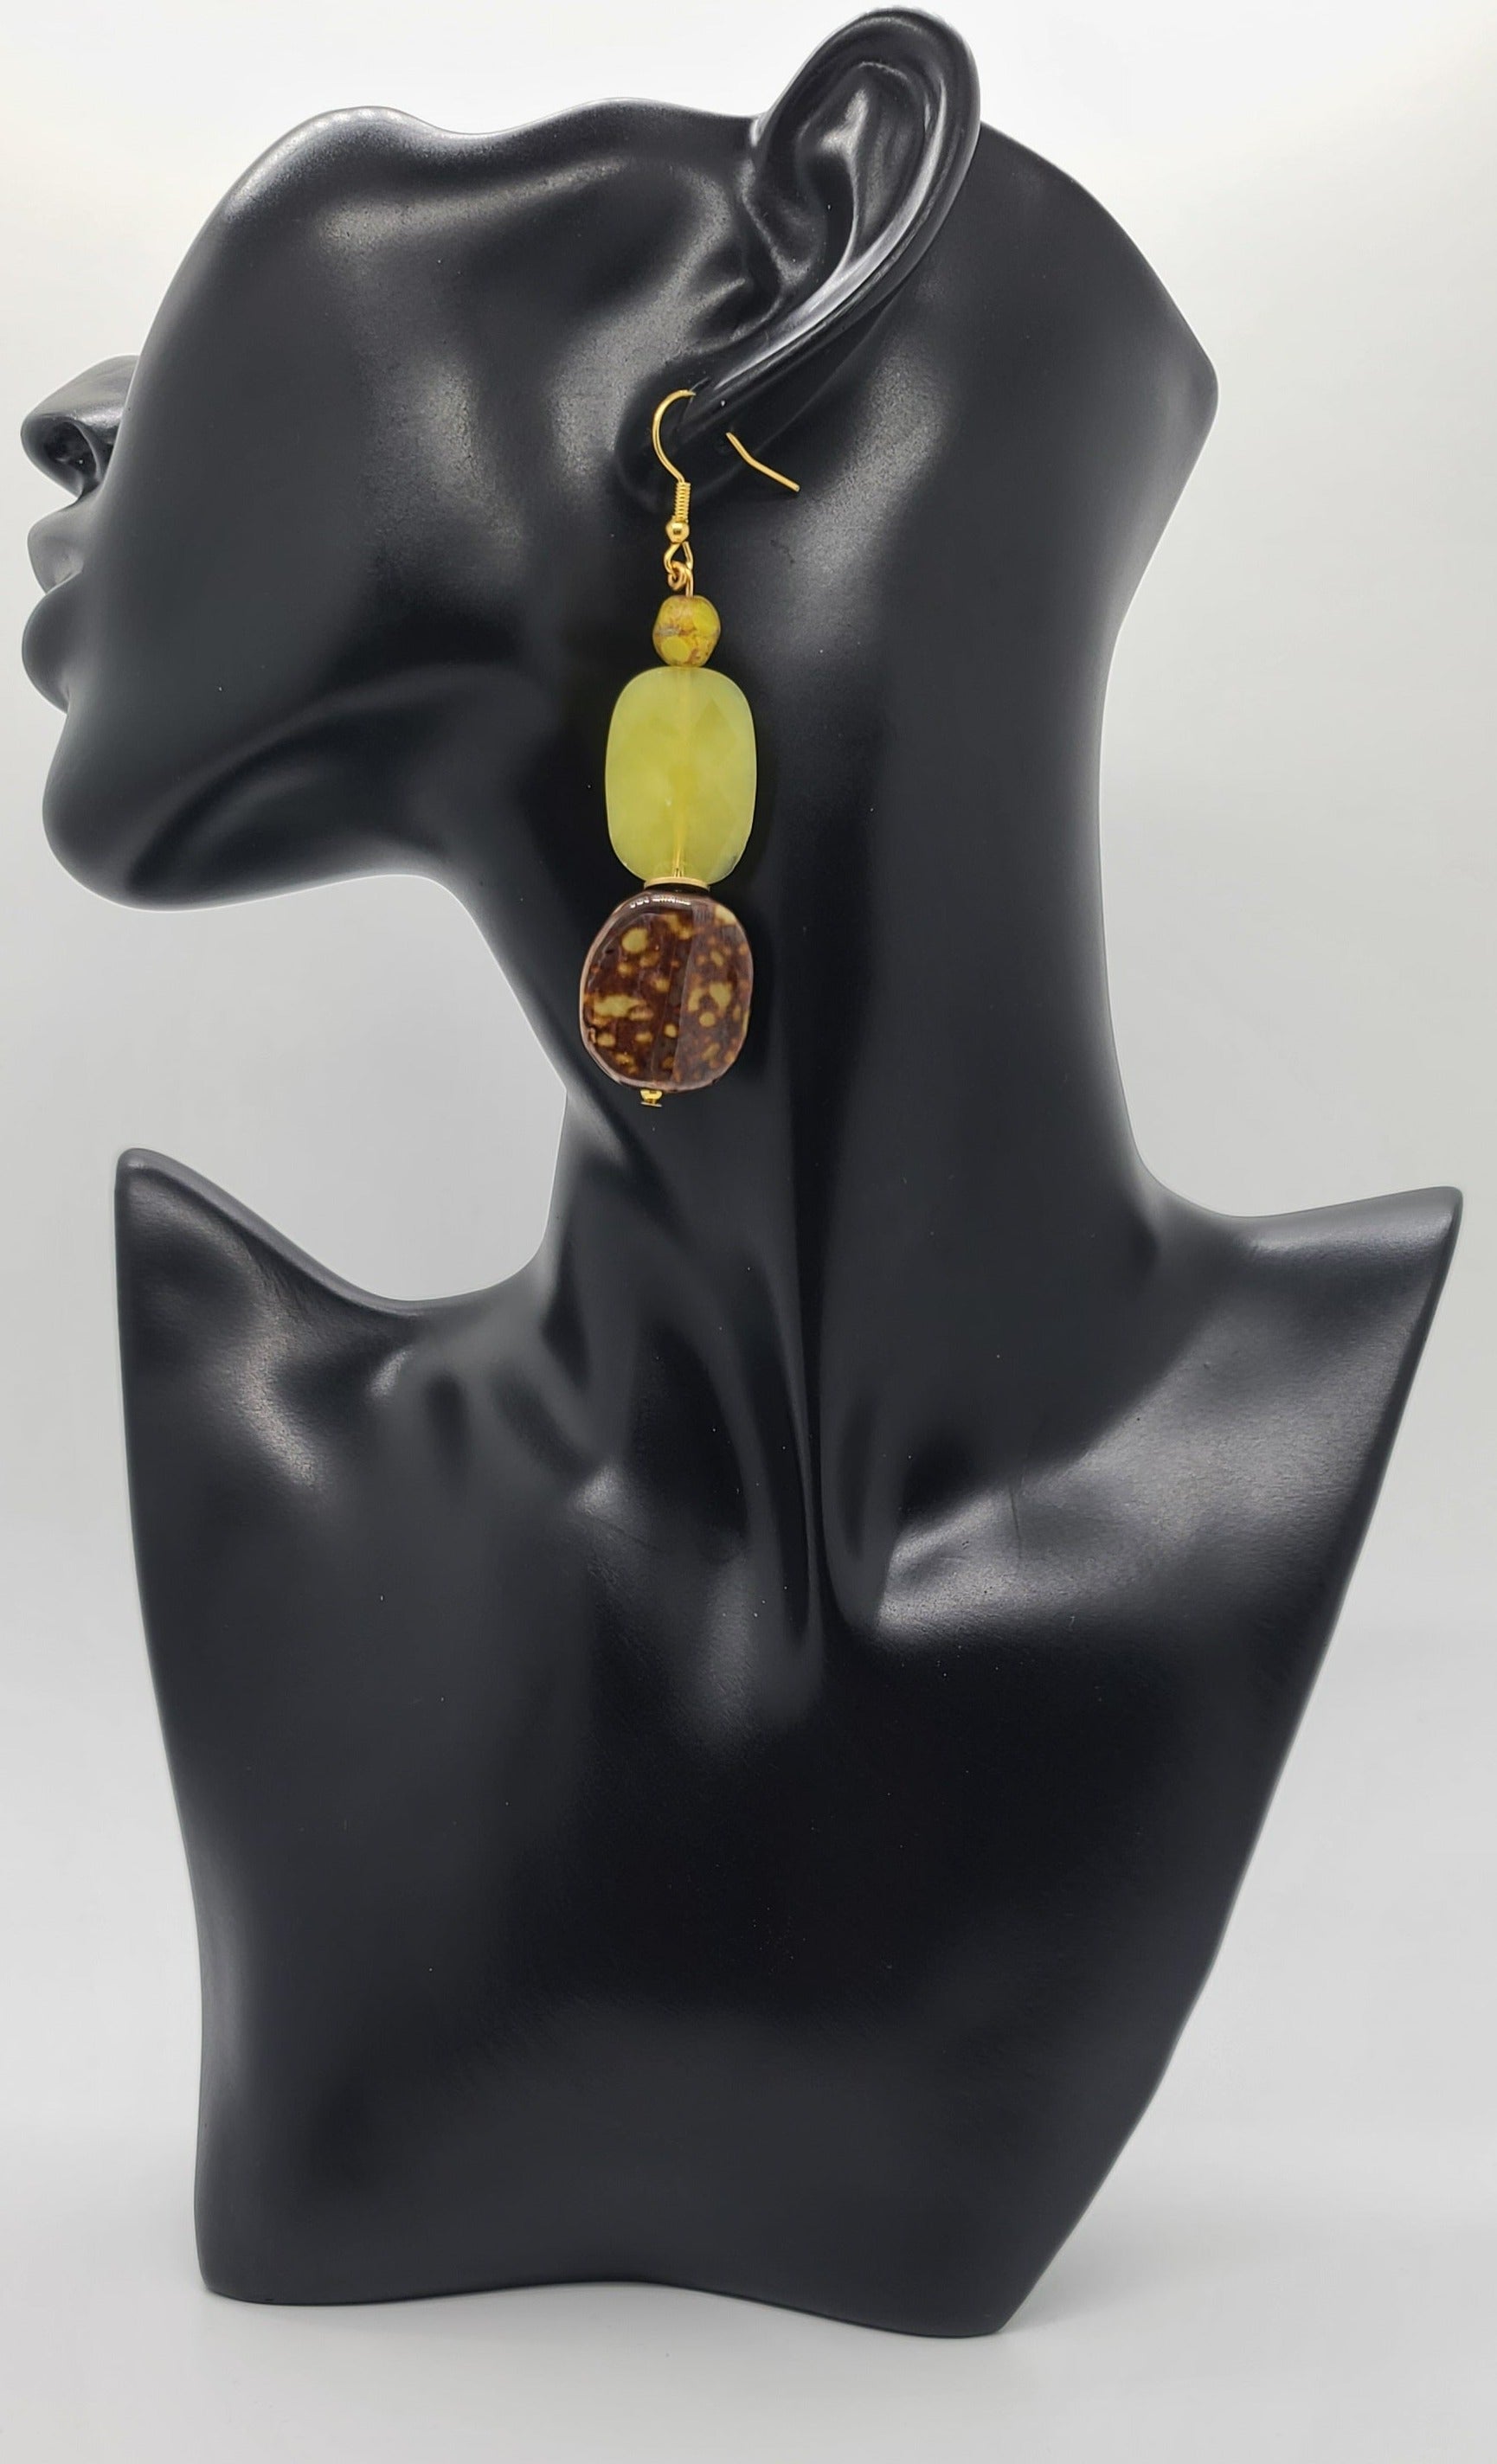 Length: 3 inches | Weight: 0.7 ounces  Distinctly You! These earrings are made with brown and gold print ceramic stones, citron green glass faceted stones, 8mm brown and green matte colored faceted glass beads, gold seed beads, and gold rondells.